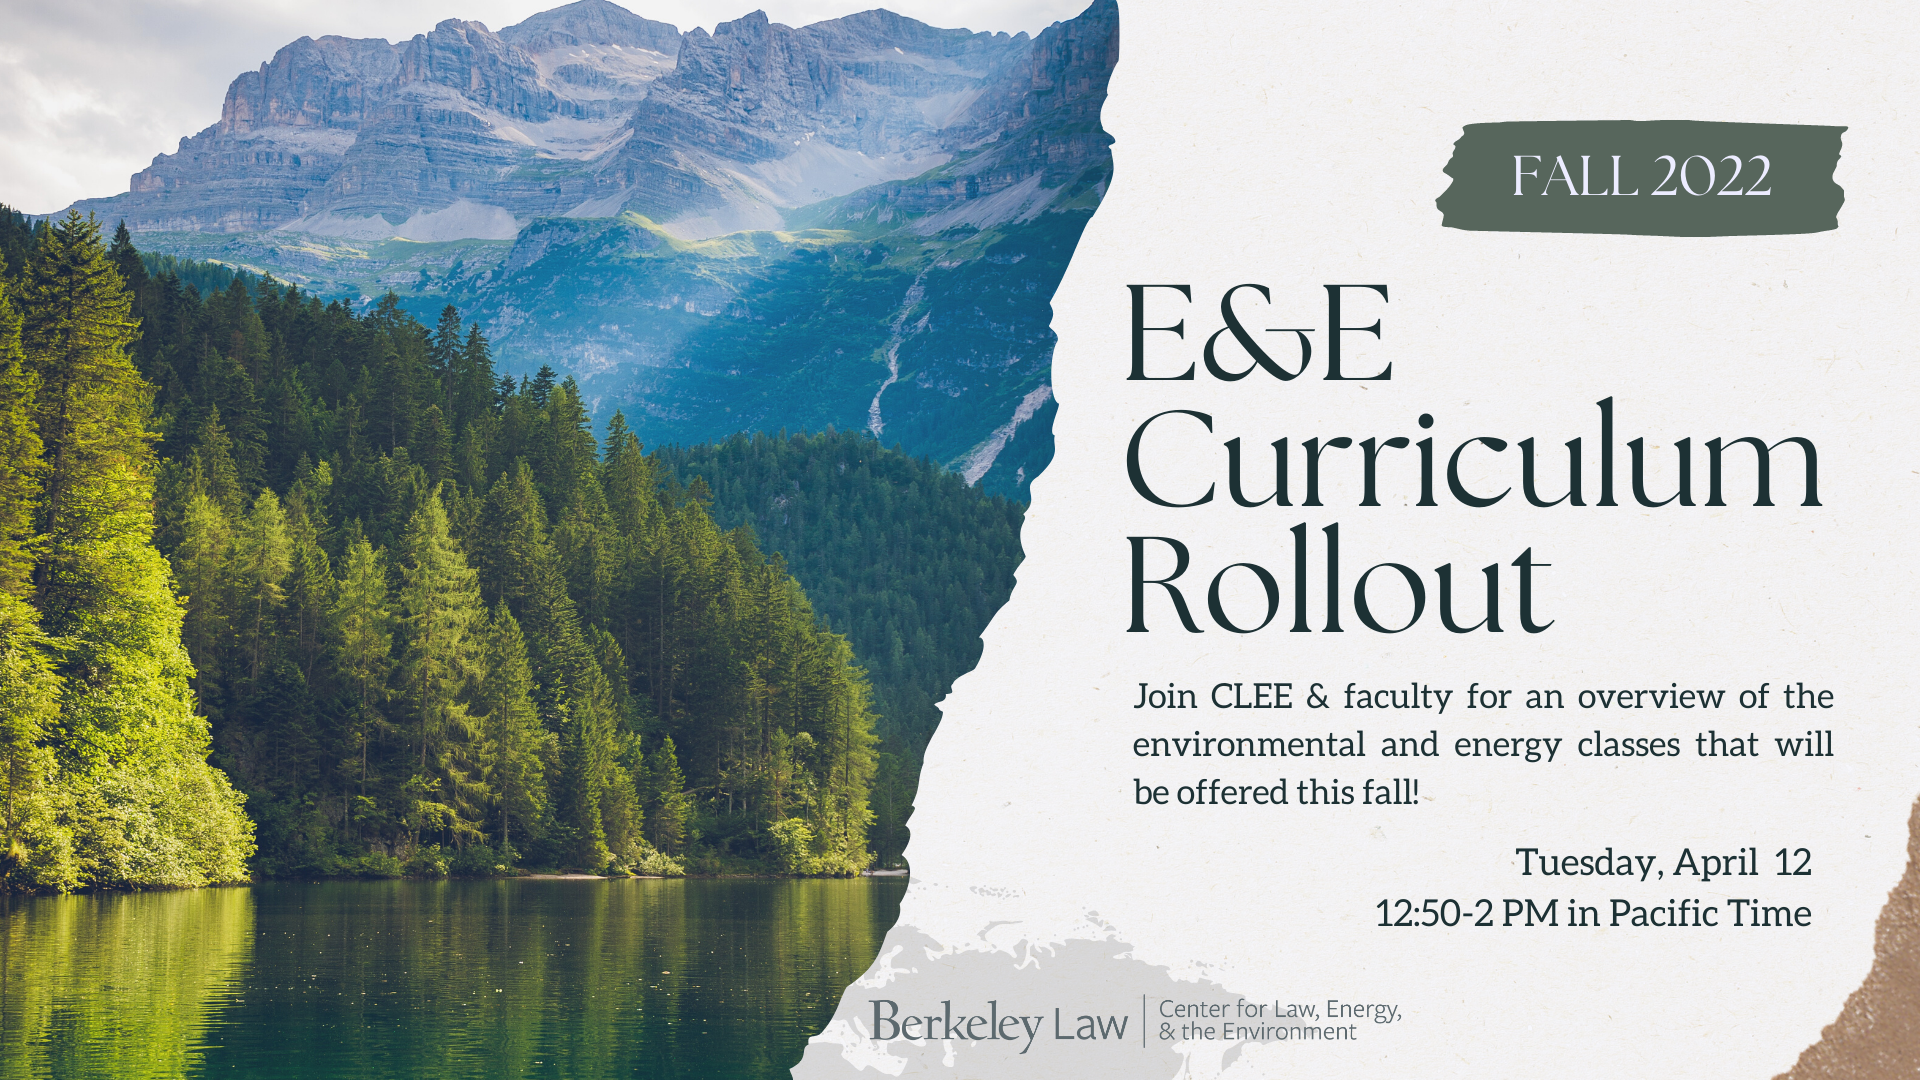 CLEE Curriculum rollout flyer